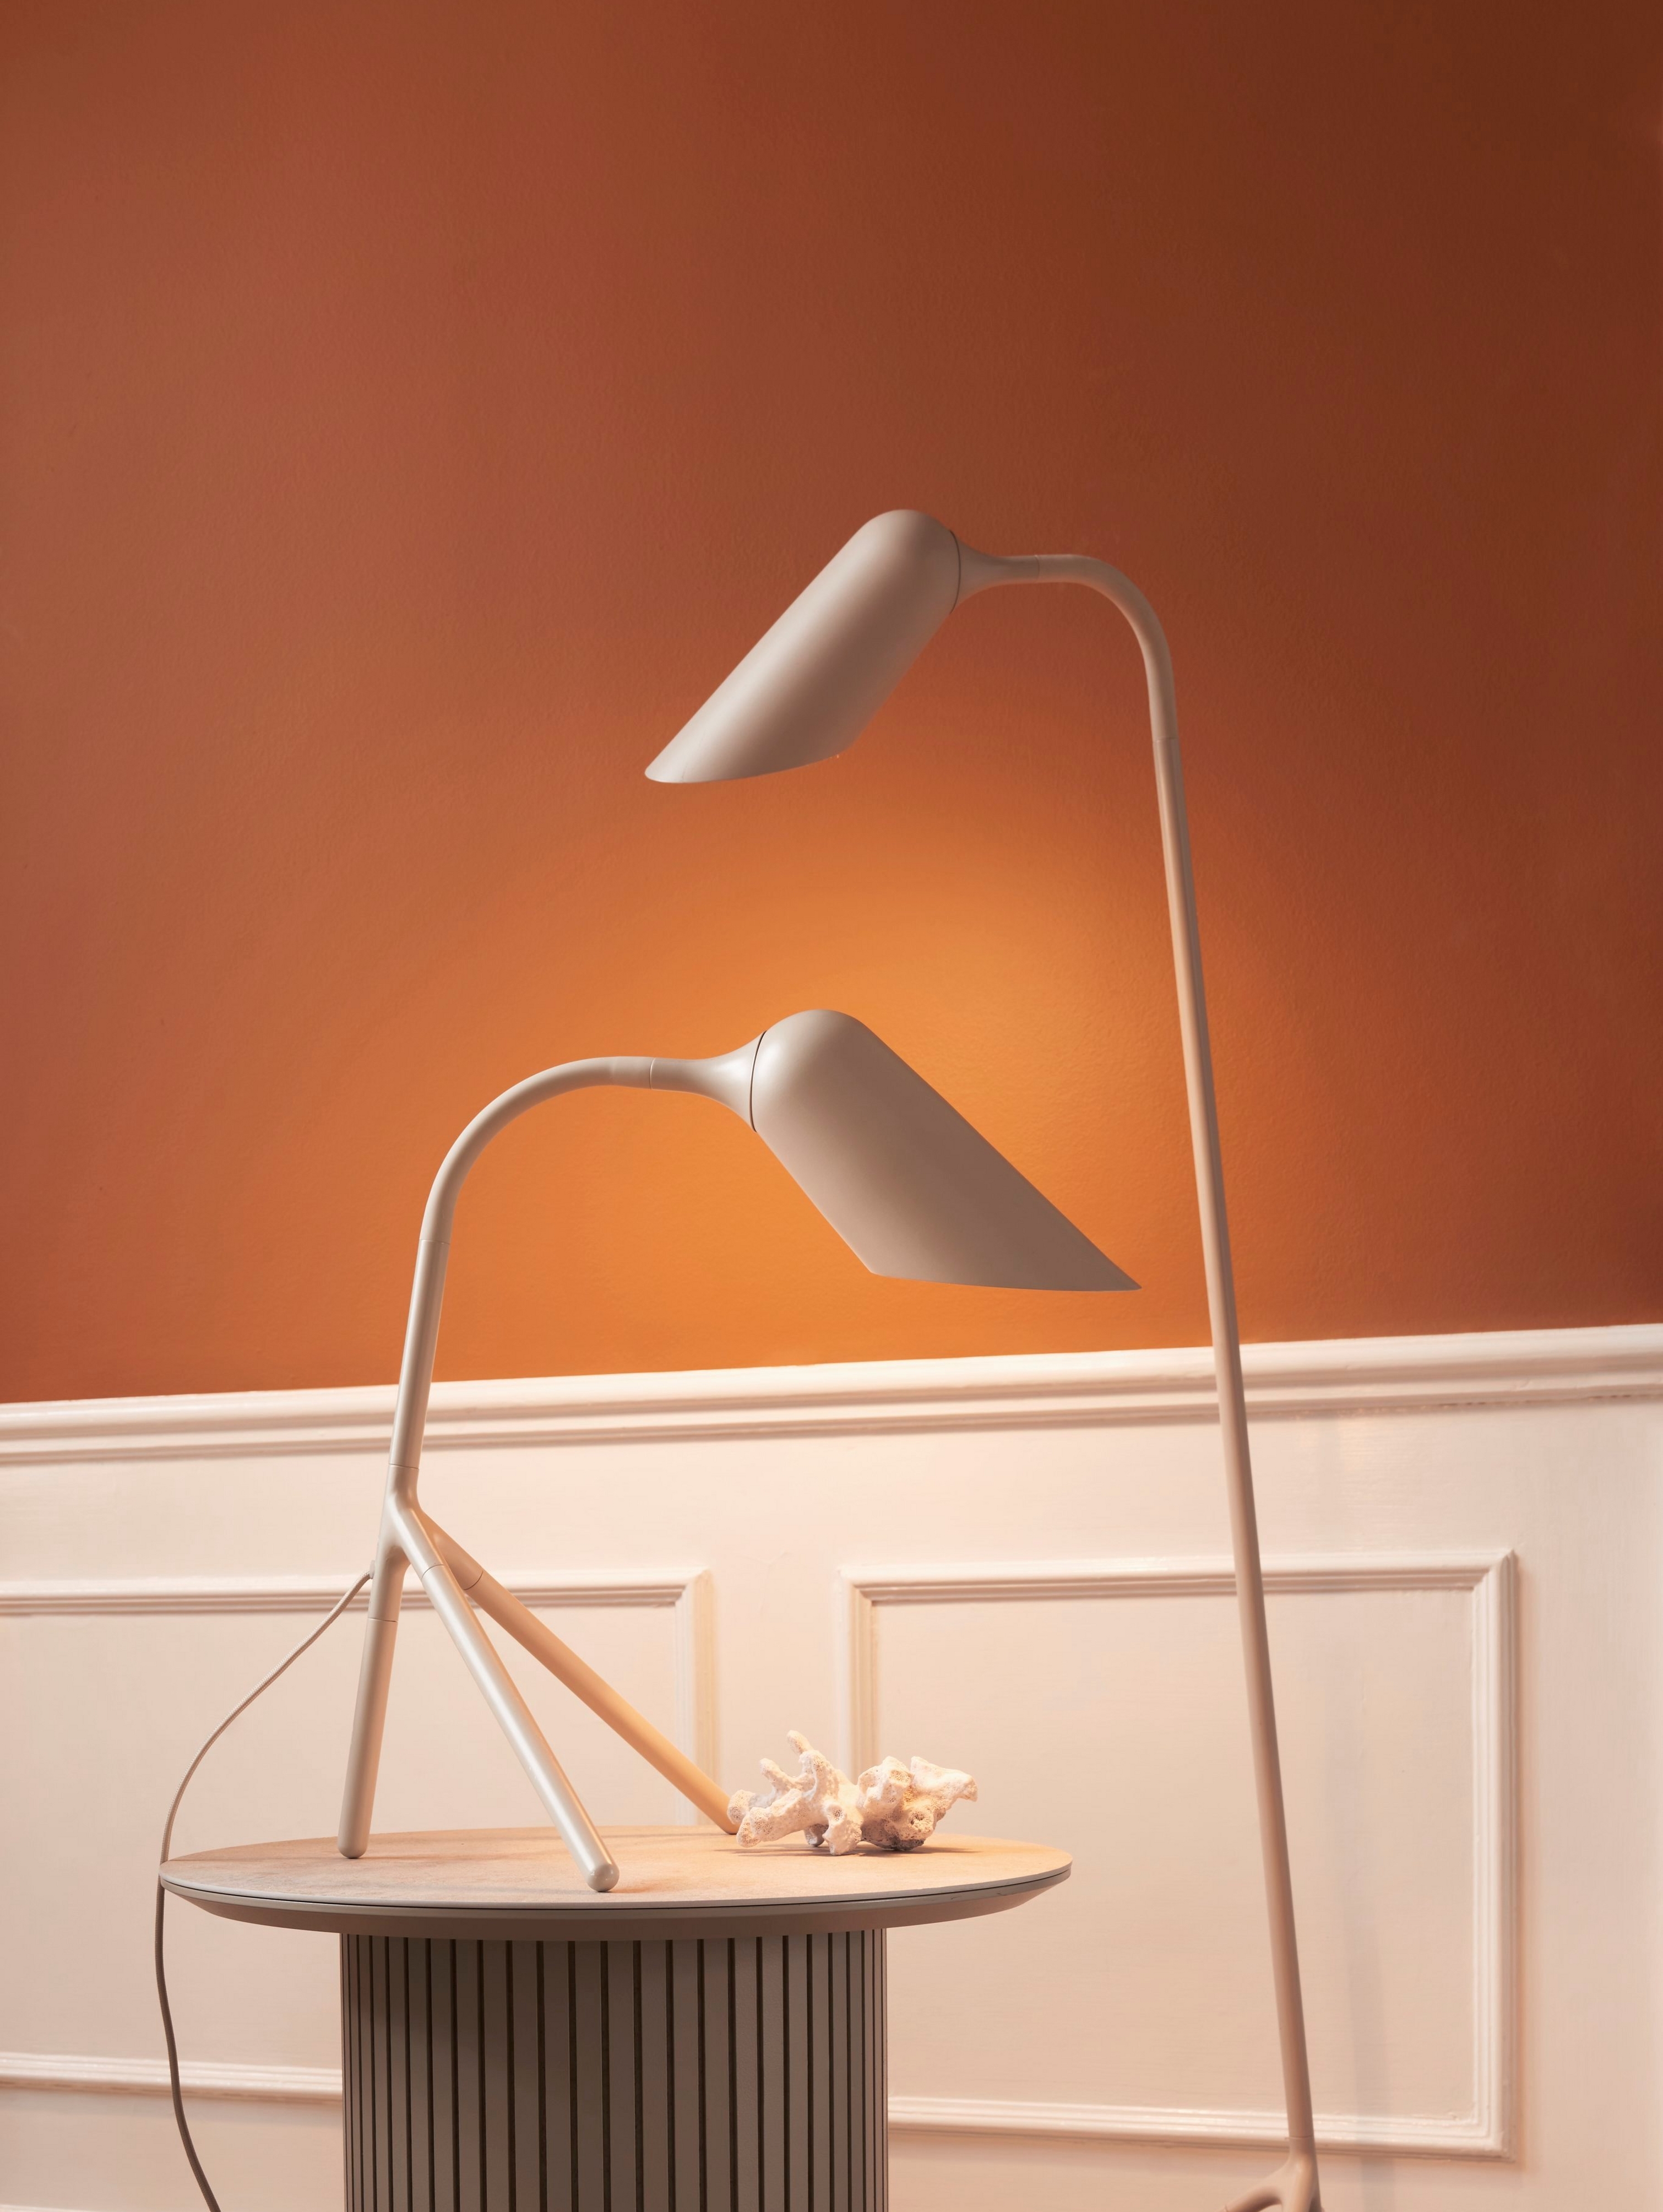 Arrangement of the Curious table lamp and the Curious floor lamp